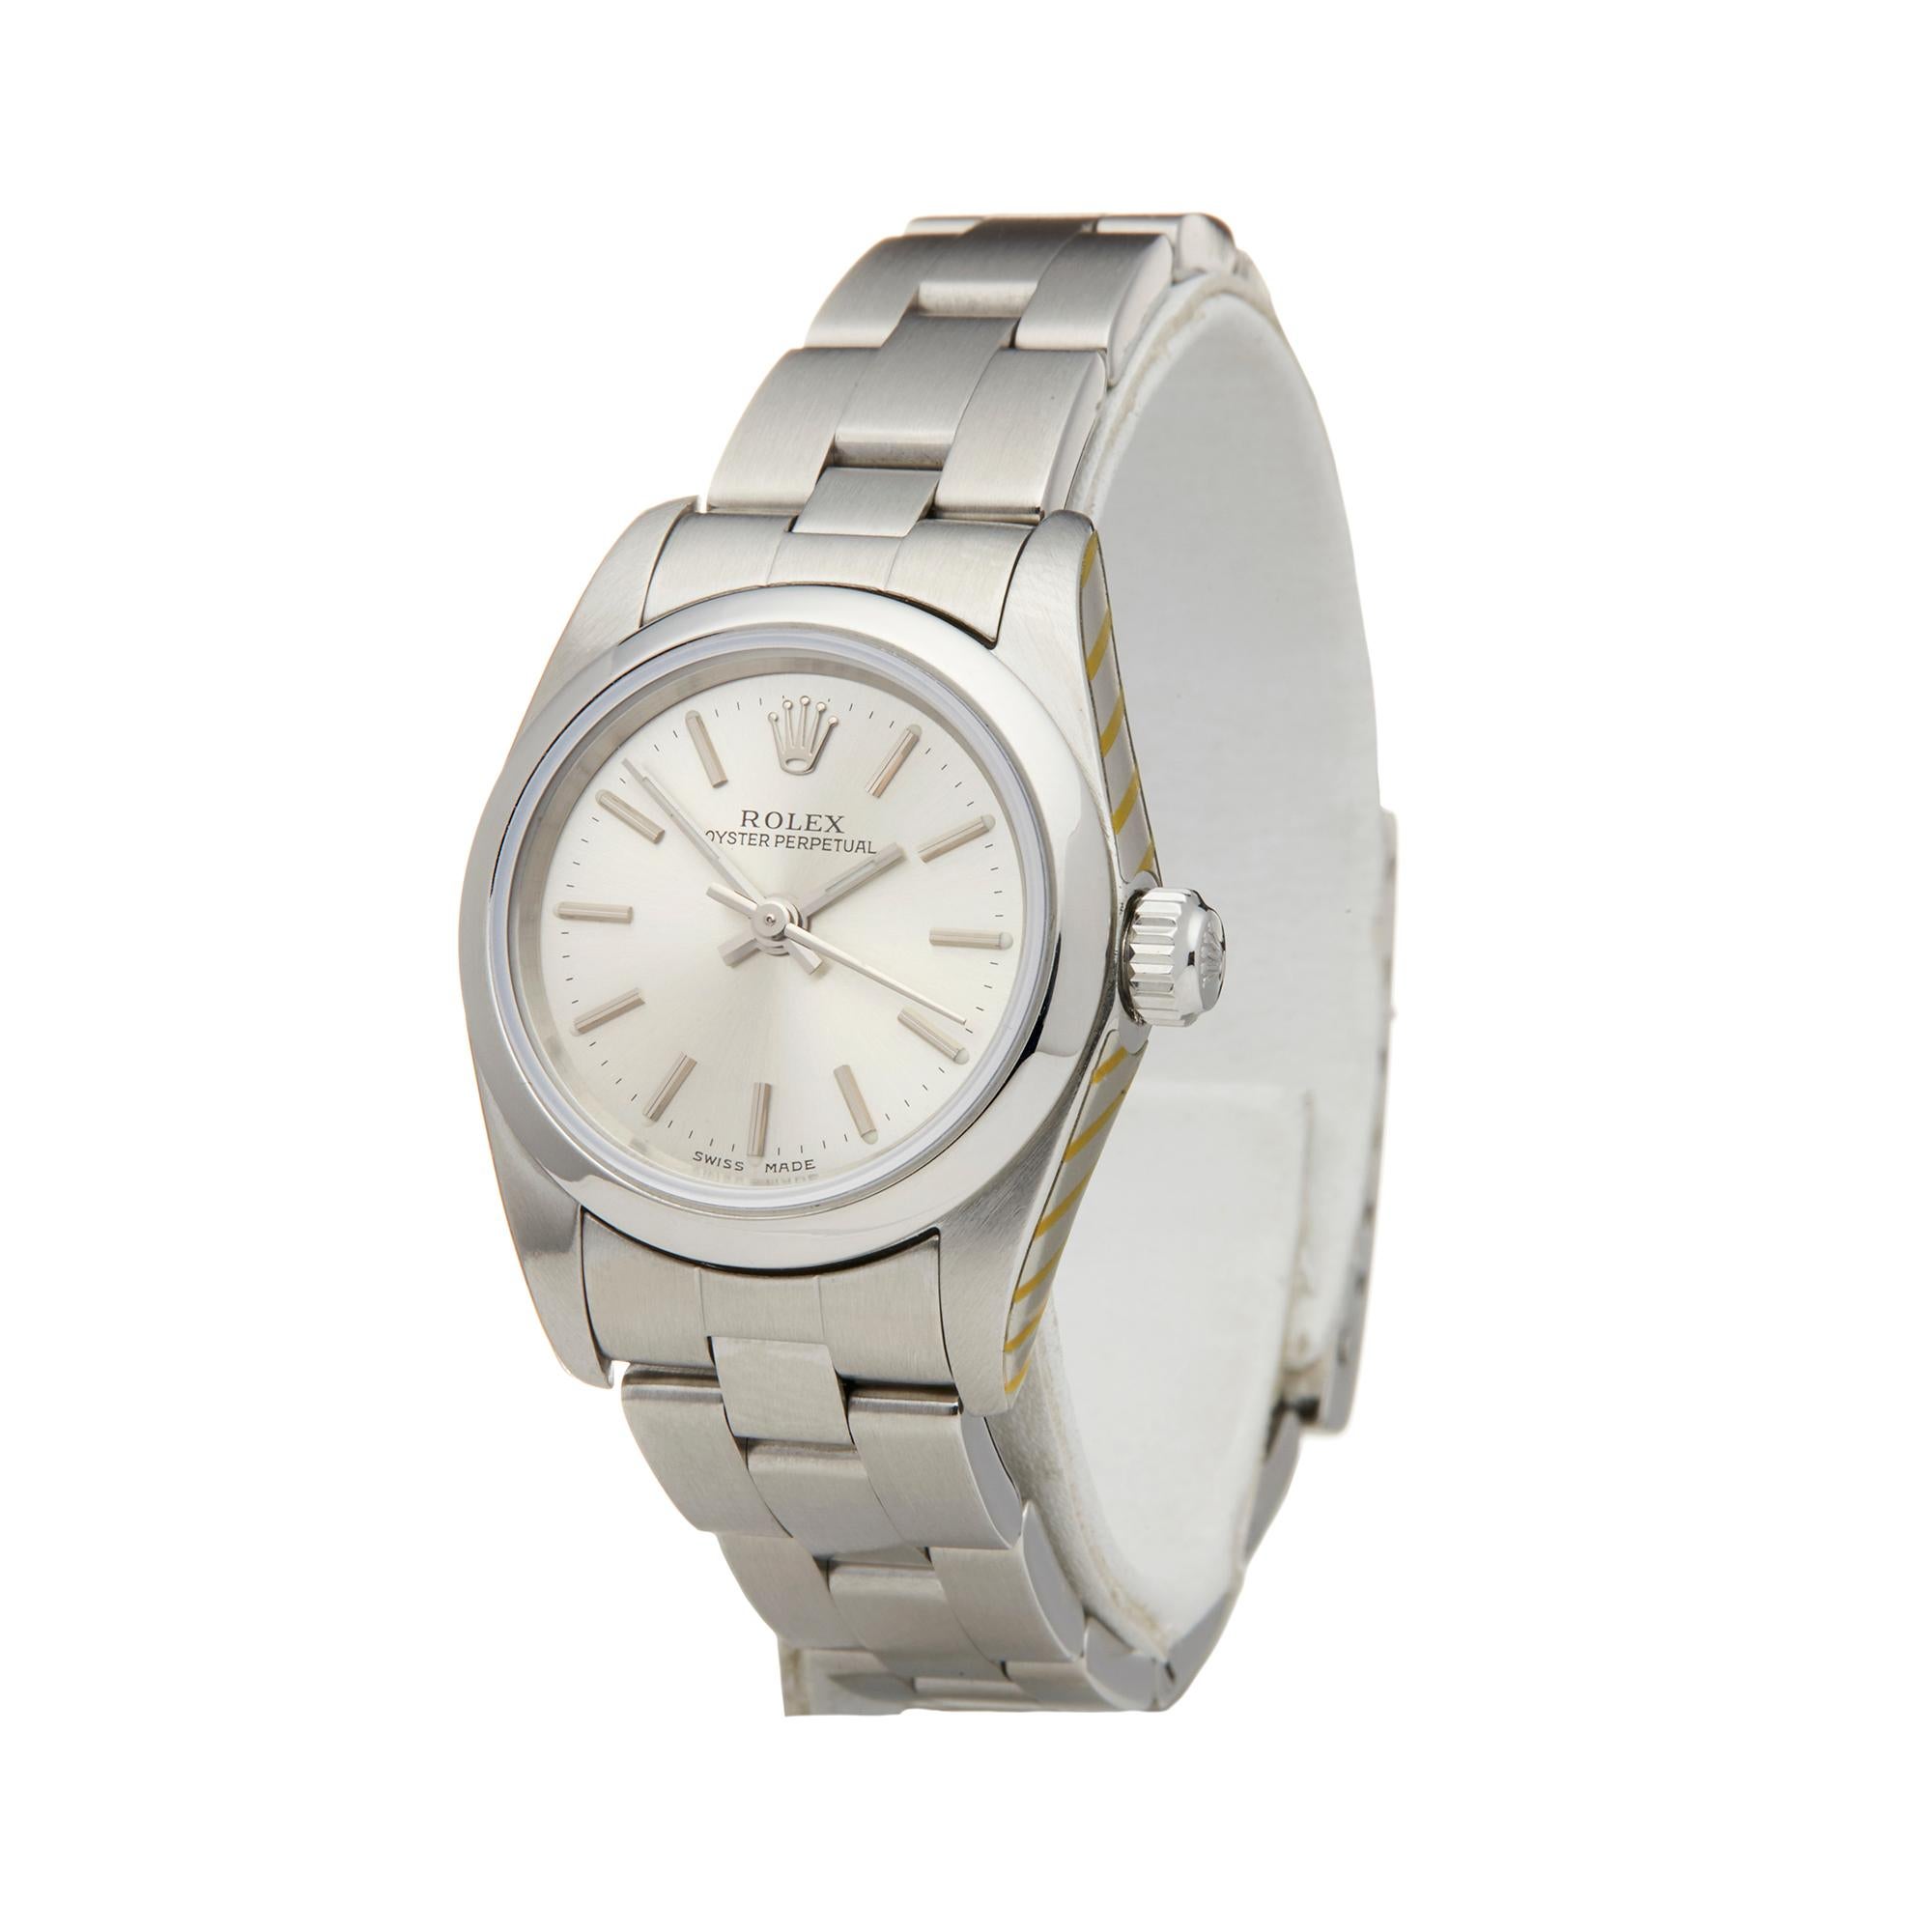 Reference: W6119
Manufacturer: Rolex
Model: Oyster Perpetual
Model Reference: 76080
Age: Circa 2003
Gender: Women's
Box and Papers: Box and Service Papers
Dial: Silver Baton
Glass: Sapphire Crystal
Movement: Automatic
Water Resistance: To